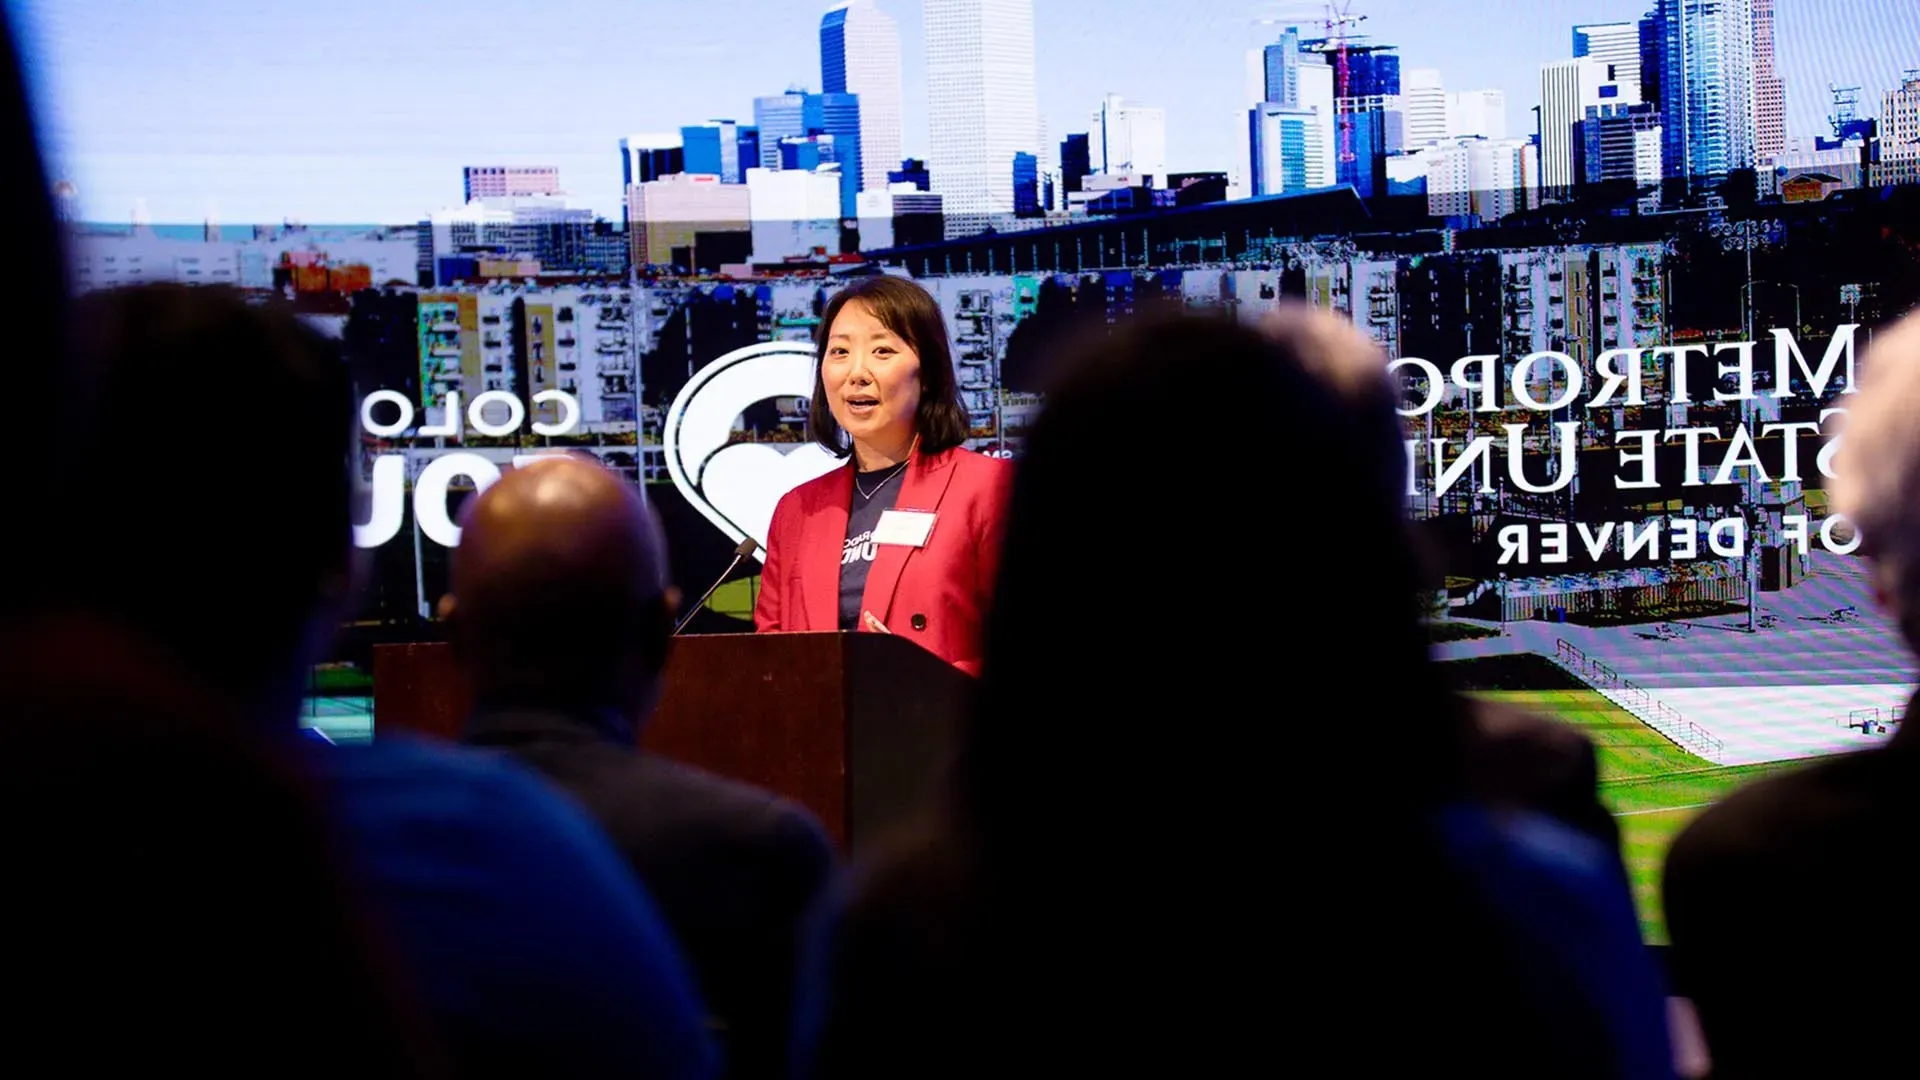 Annie Lee, president and CEO of Colorado Access and chair of the Colorado Access Foundation board of directors, understands firsthand the need for a health care workforce that reflects and represents its patient population